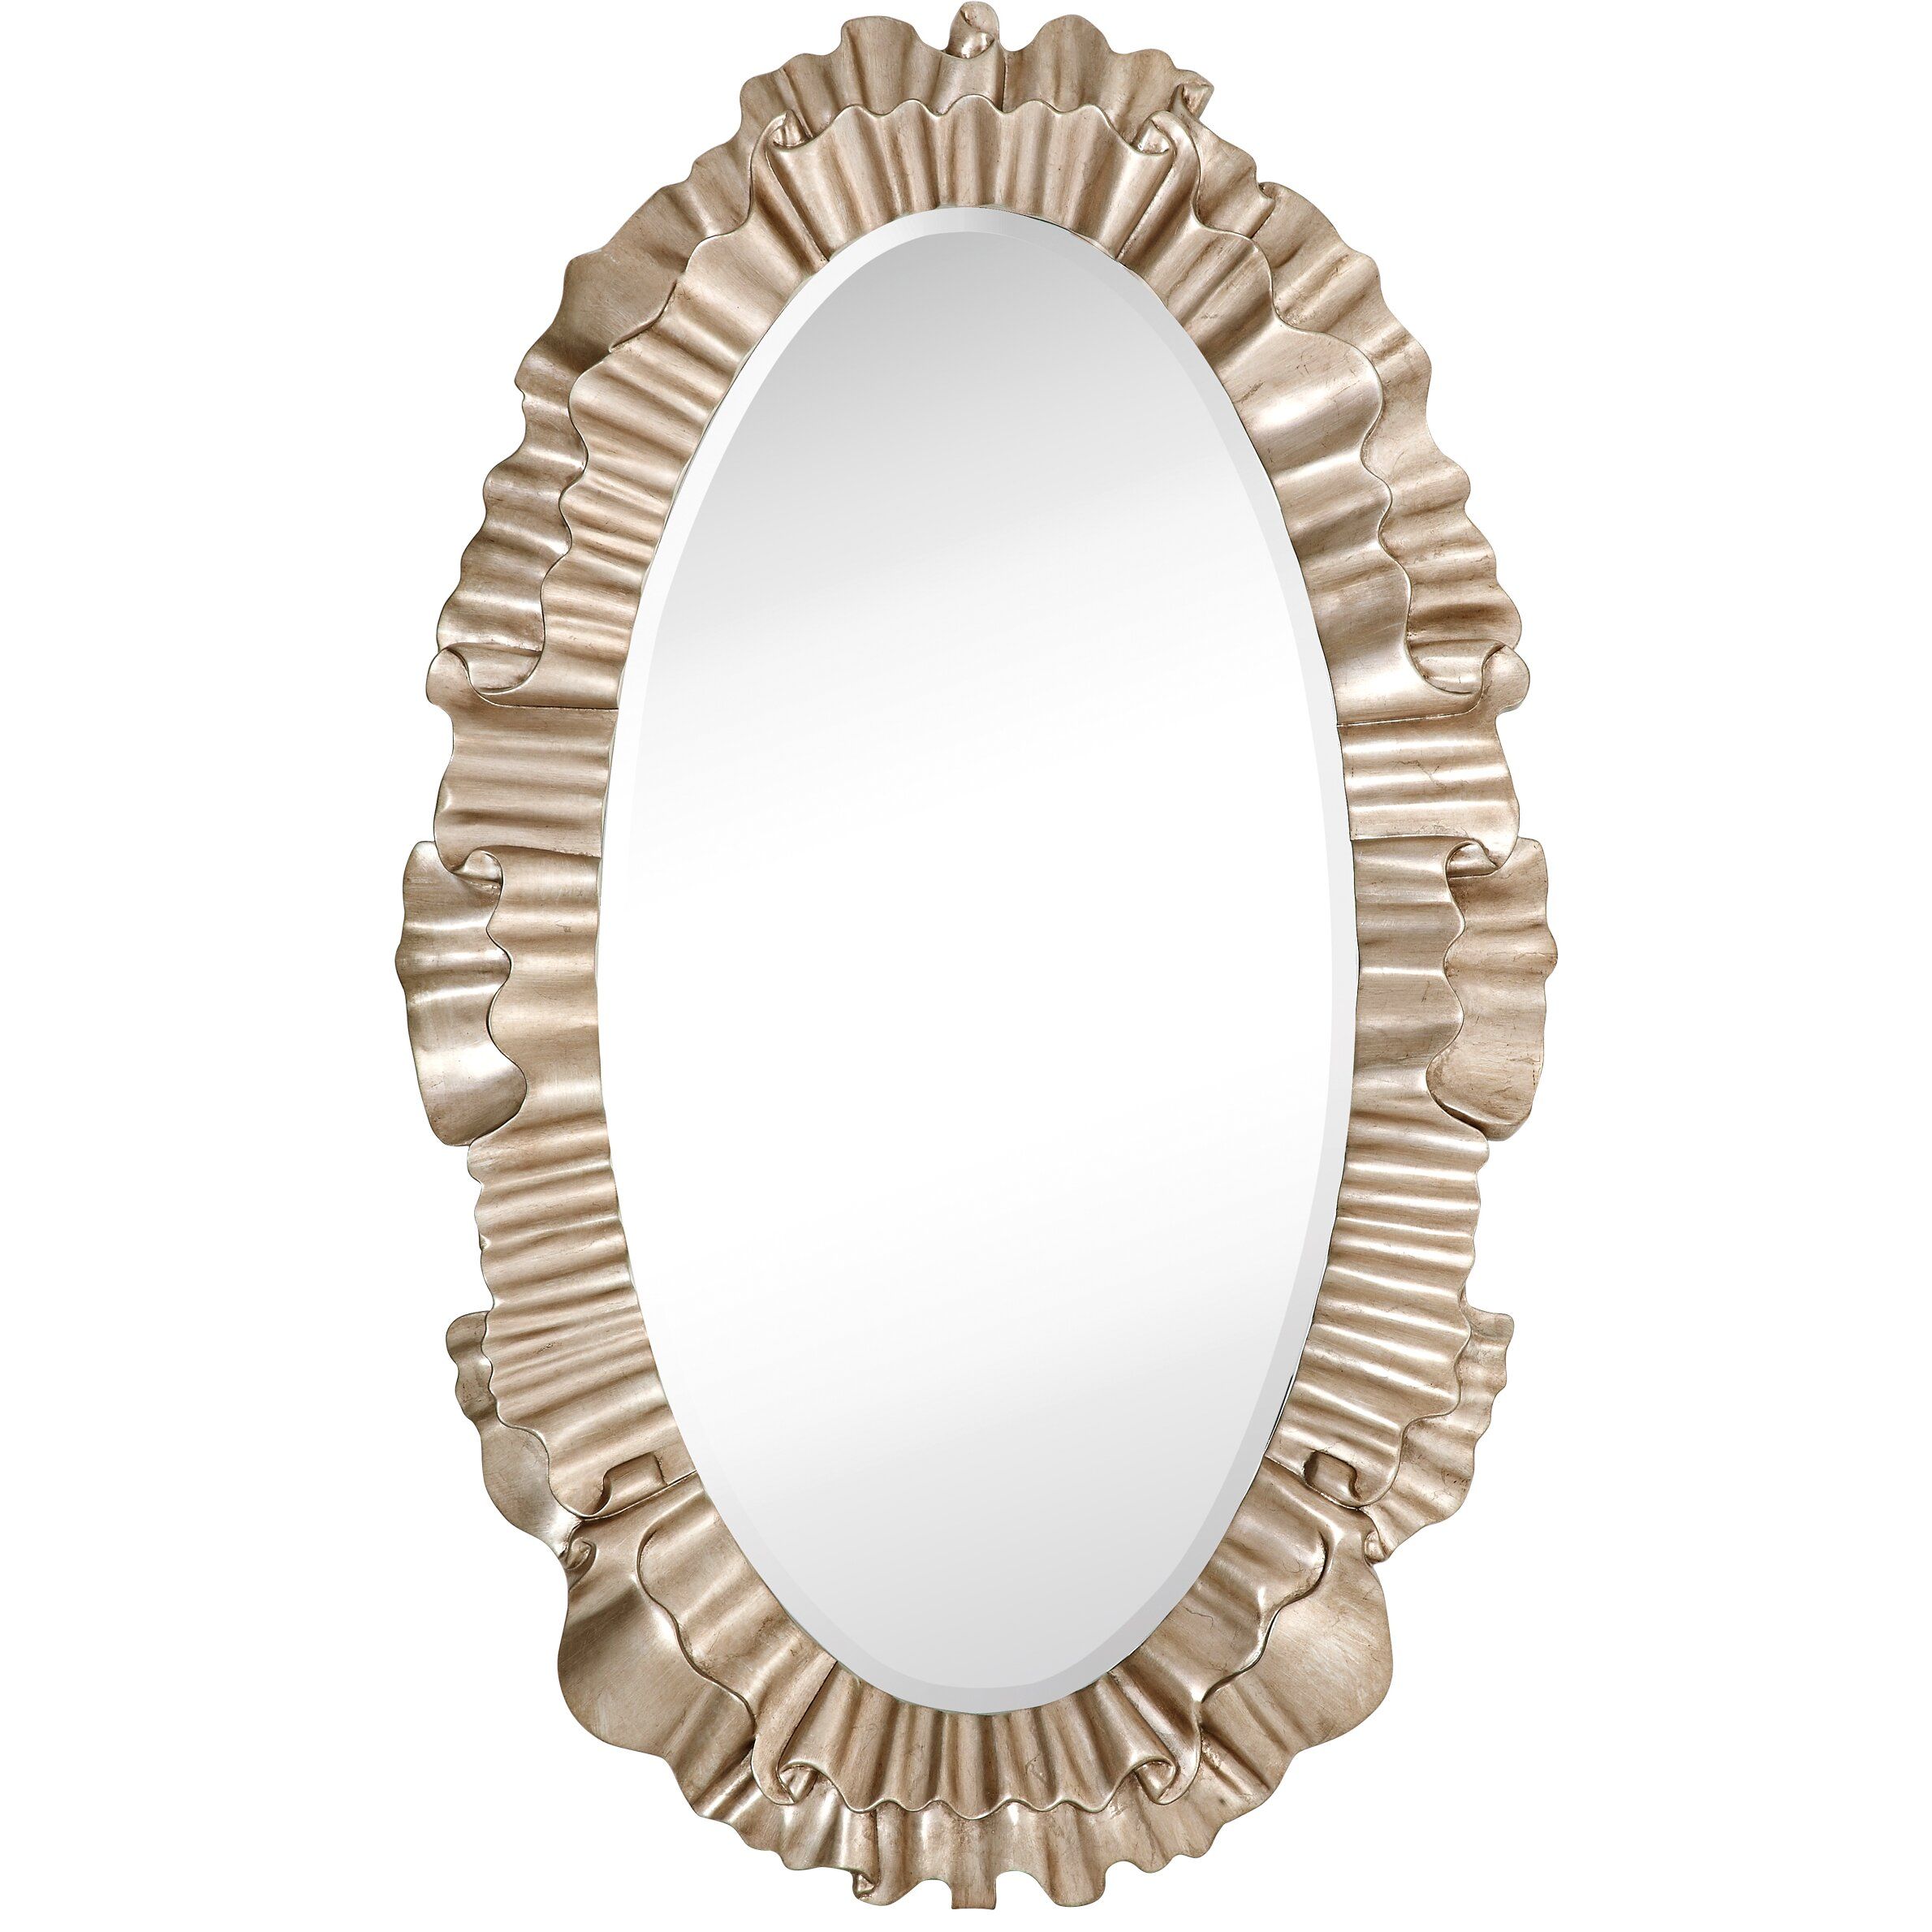 Majestic Mirror Oval Antique Silver Leaf Ornate Framed Beveled Glass Throughout Metallic Gold Leaf Wall Mirrors (View 15 of 15)